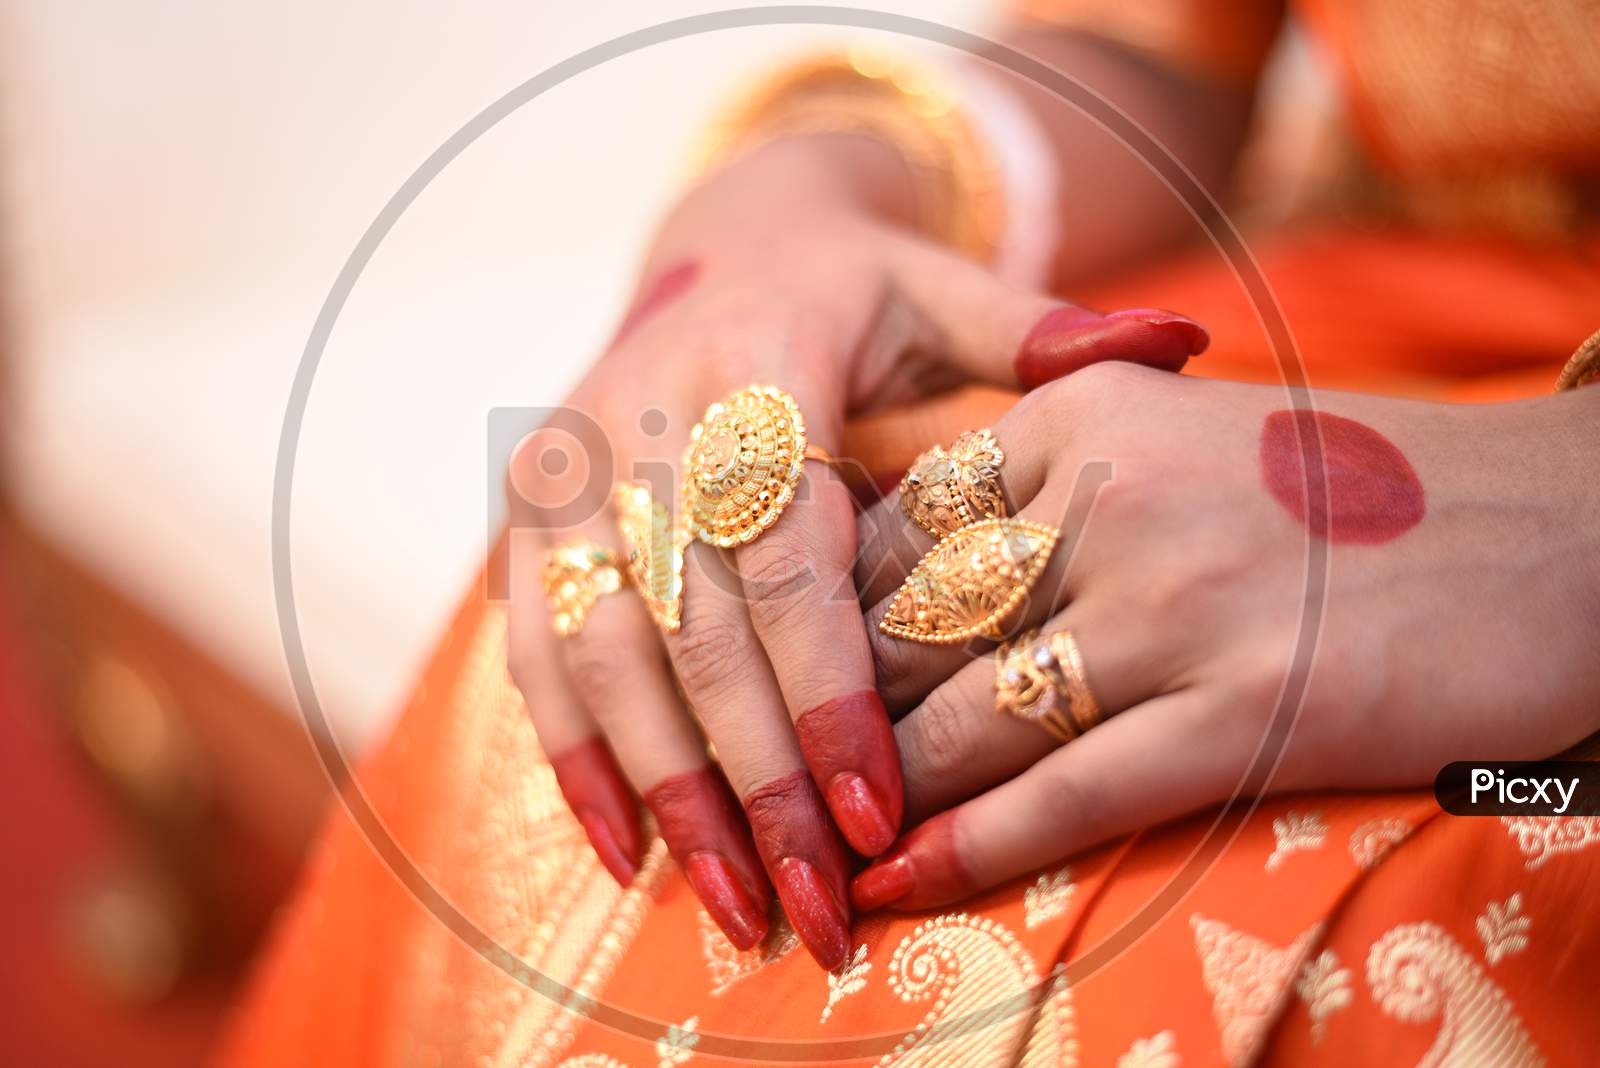 Displaying Of Gold Jewellery In Marriage.